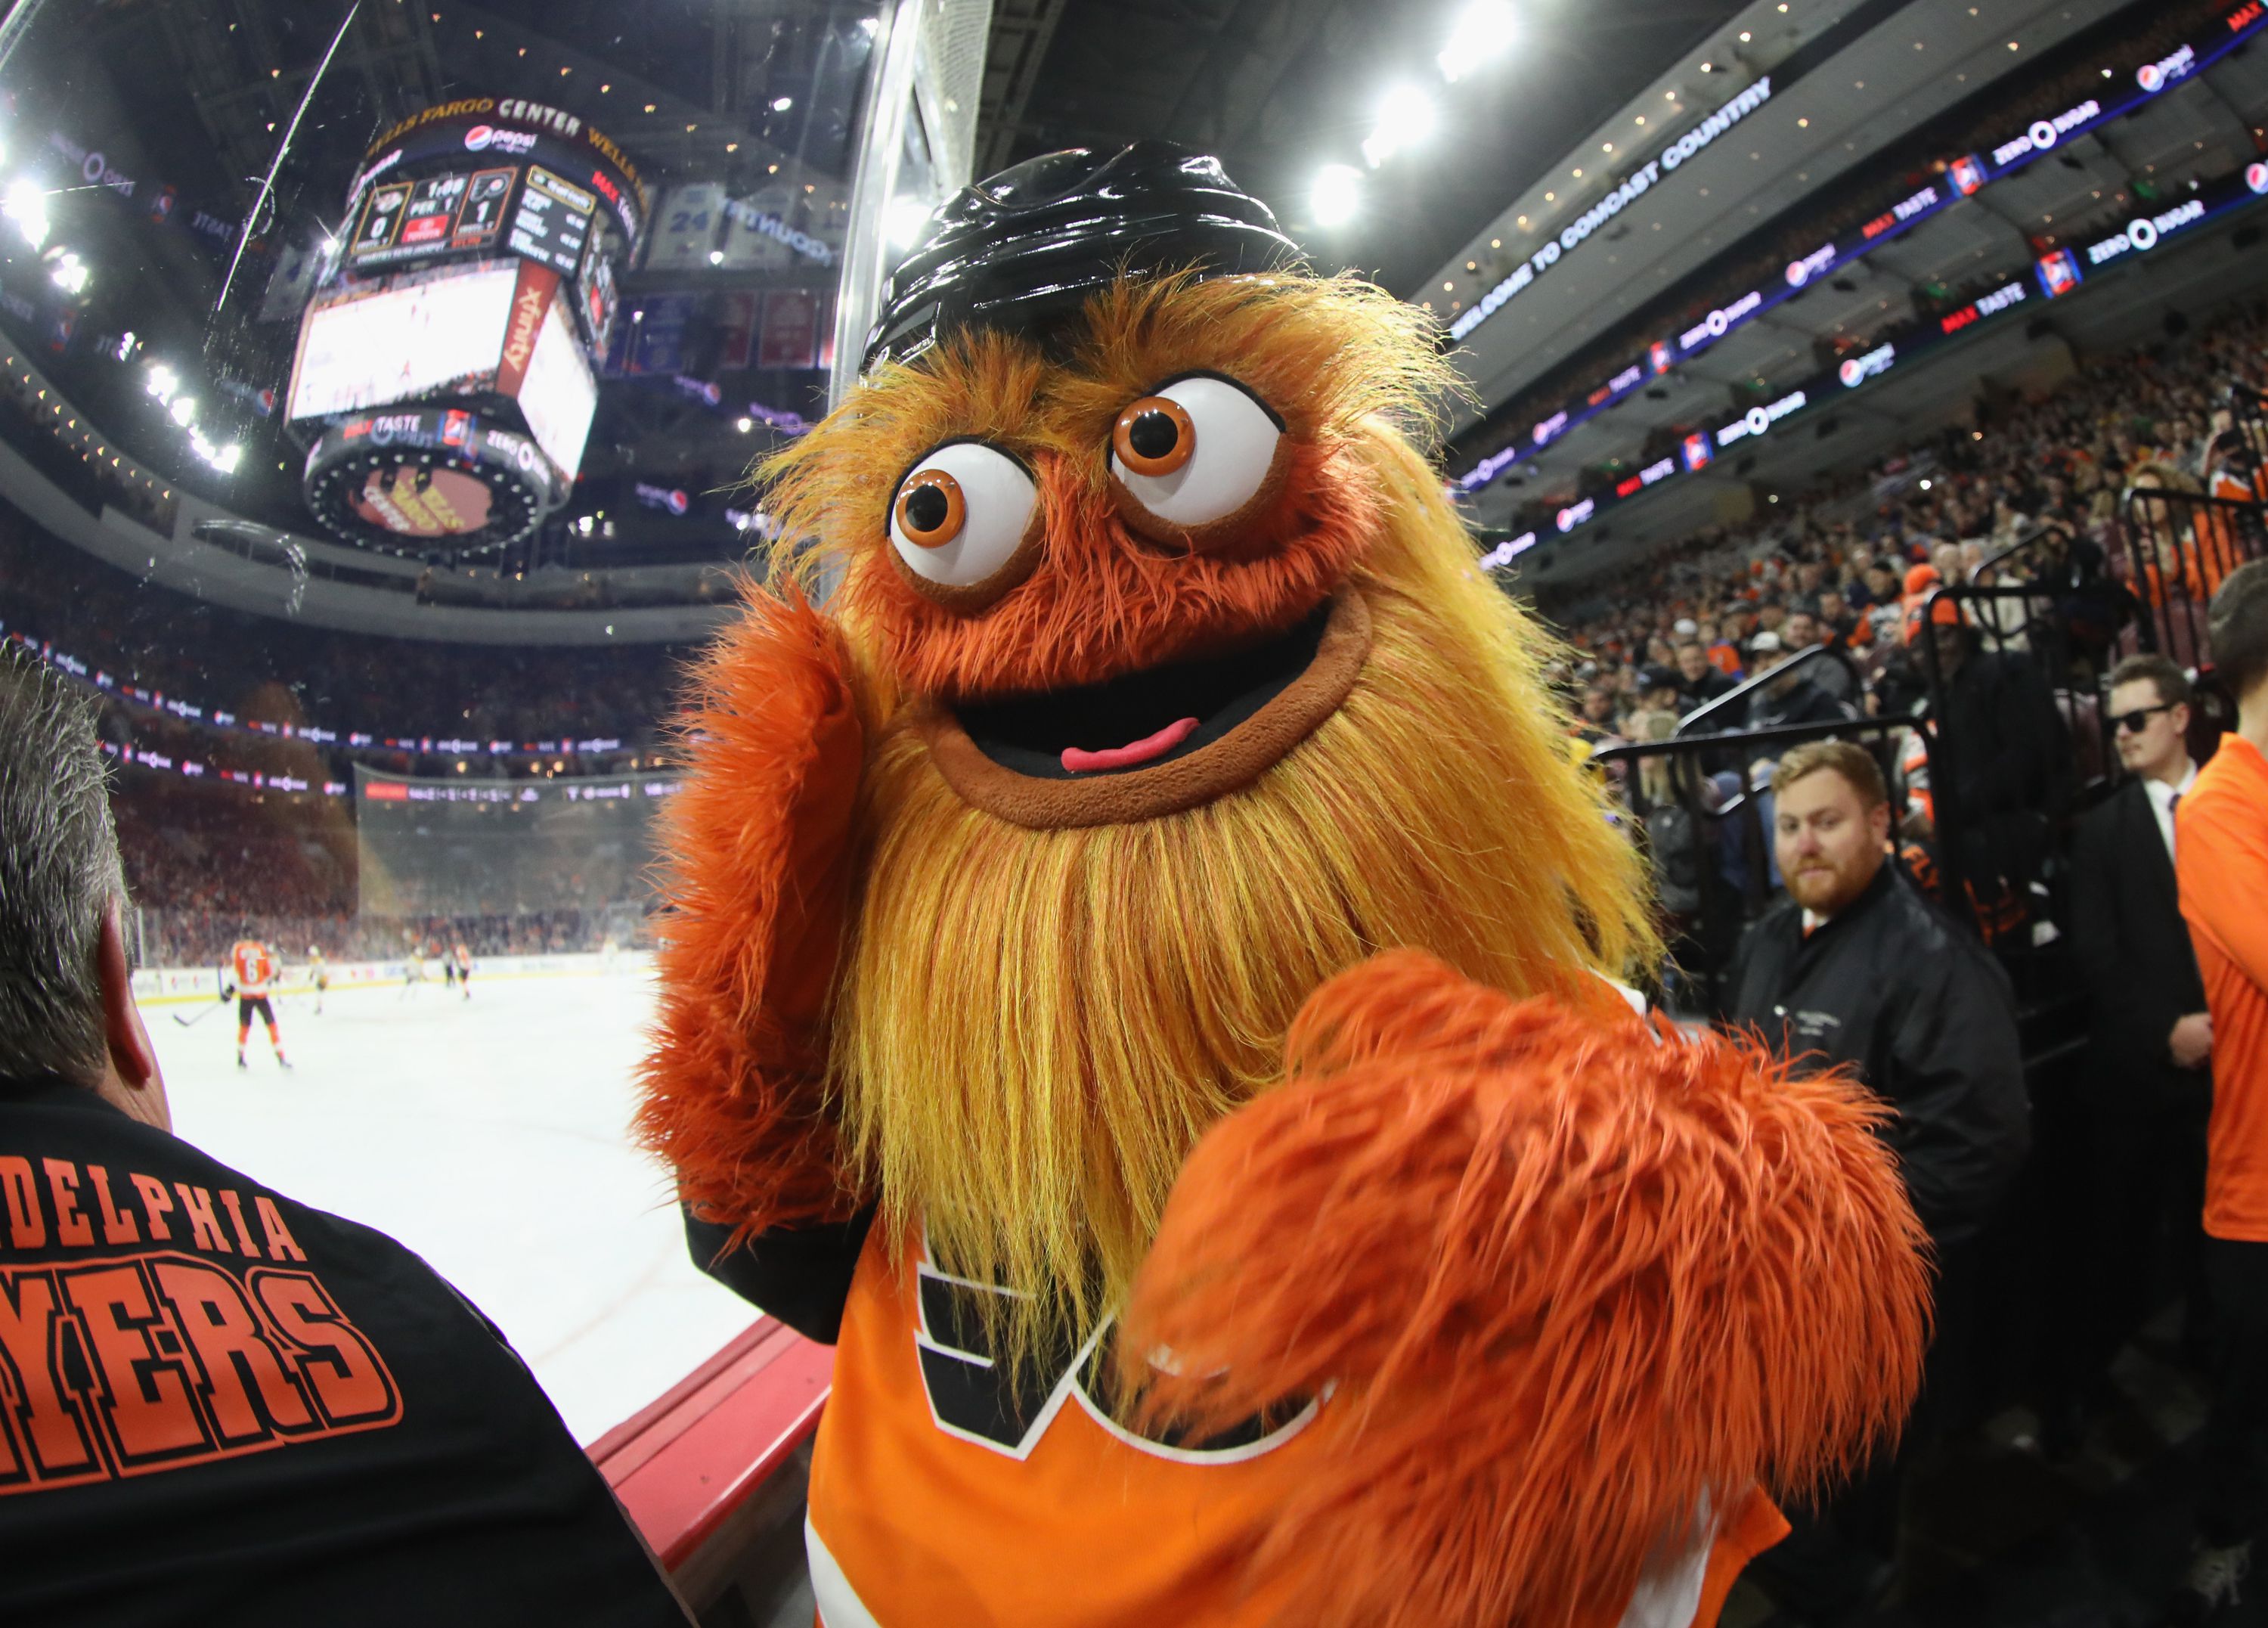 Make Gritty Essential' petition launched by Flyers' mascot 